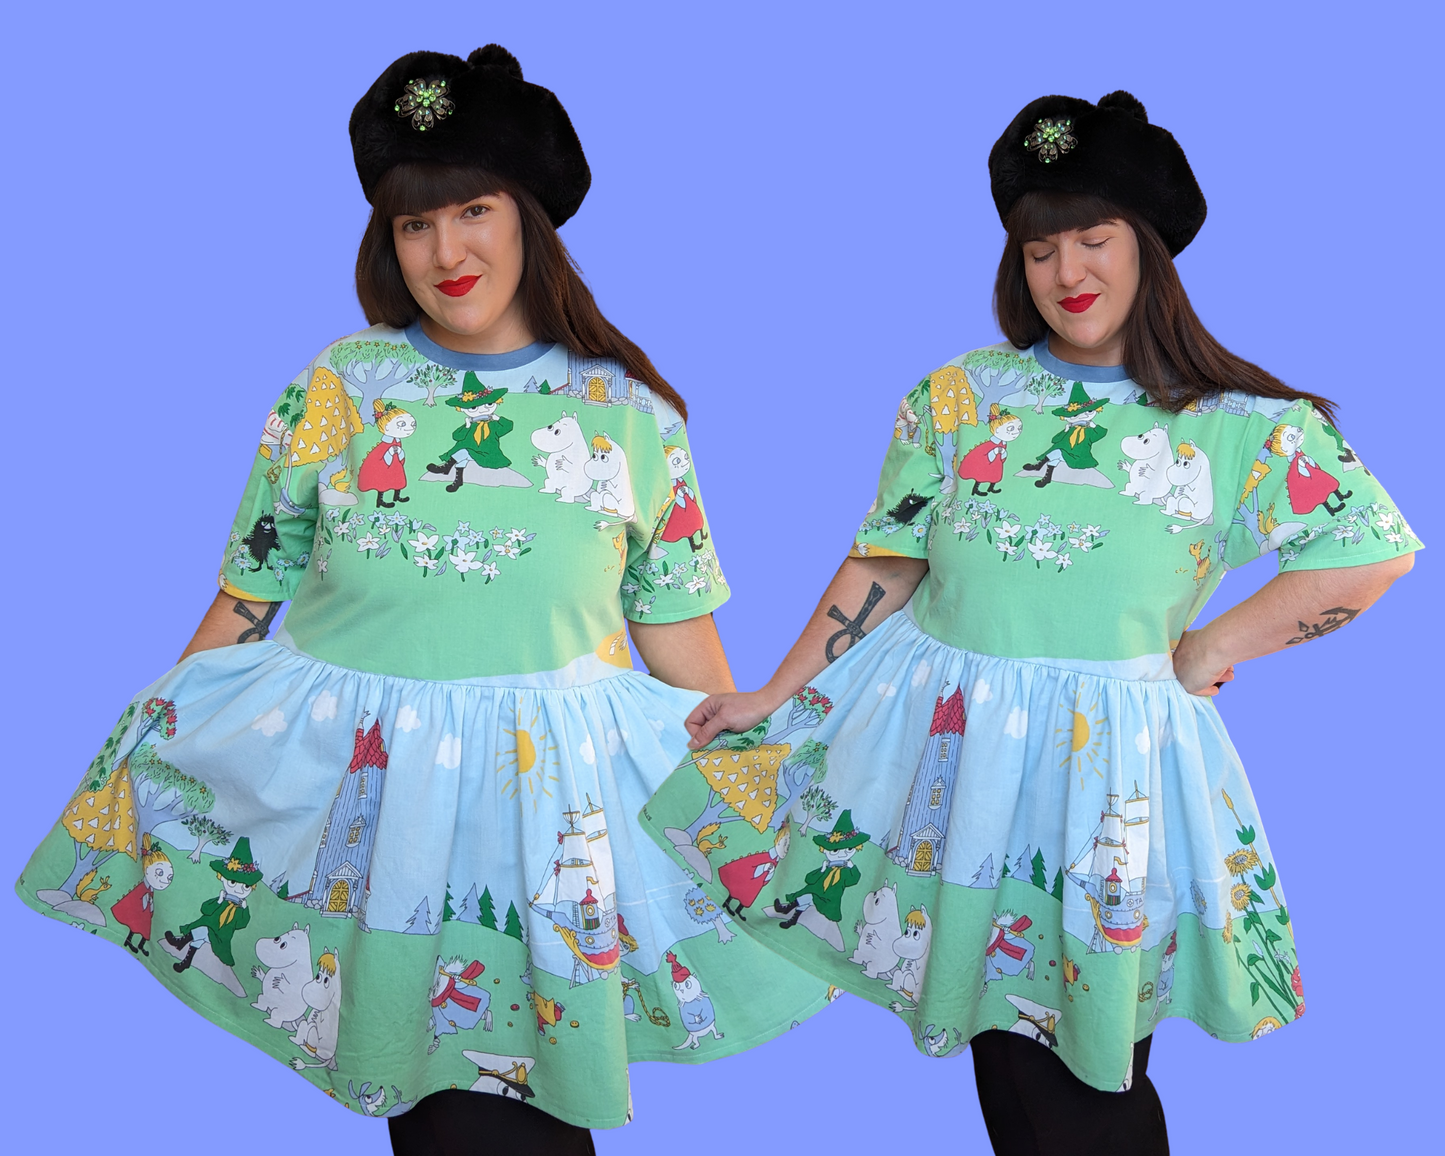 Handmade, Upcycled The Moomins Bedsheet T-Shirt Dress Fits S-M-L-XL